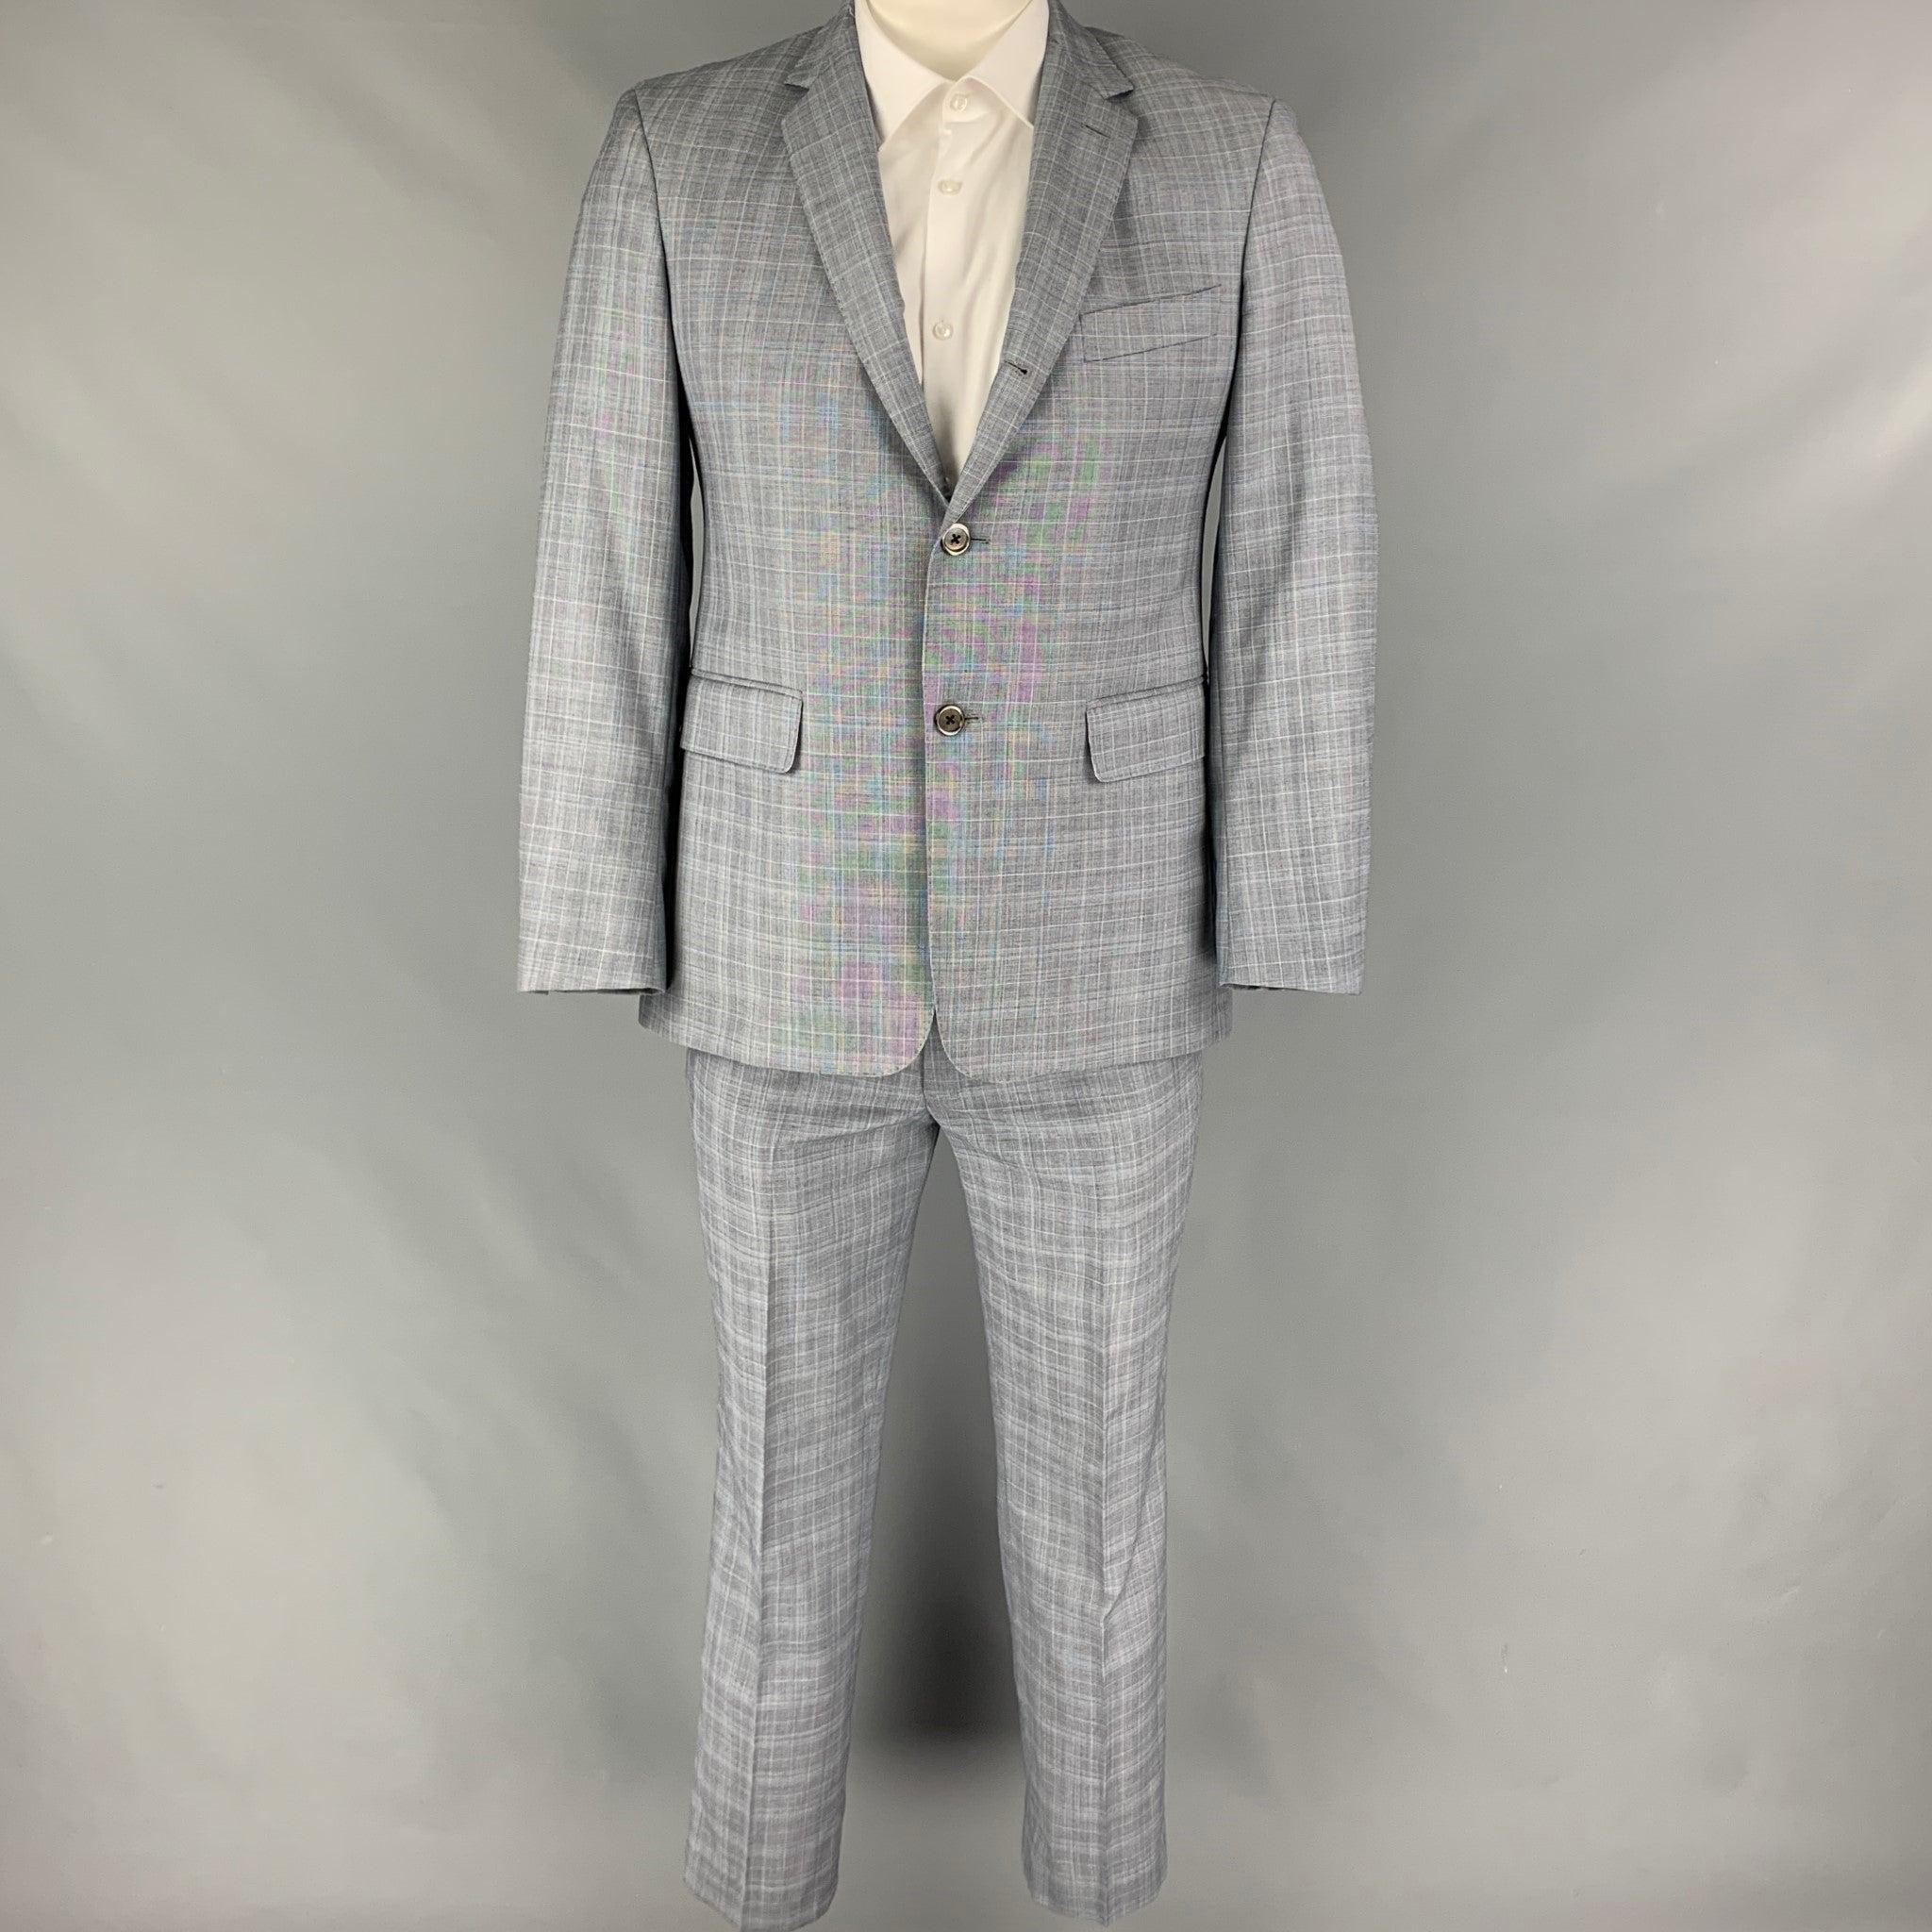 BLACK FLEECE
suit comes in a grey plaid wool with a full liner and includes a single breasted, three button sport coat with a notch lapel and matching flat front trousers. Made in USA. Very Good Pre-Owned Condition. 

Marked:   BB2 

Measurements: 
